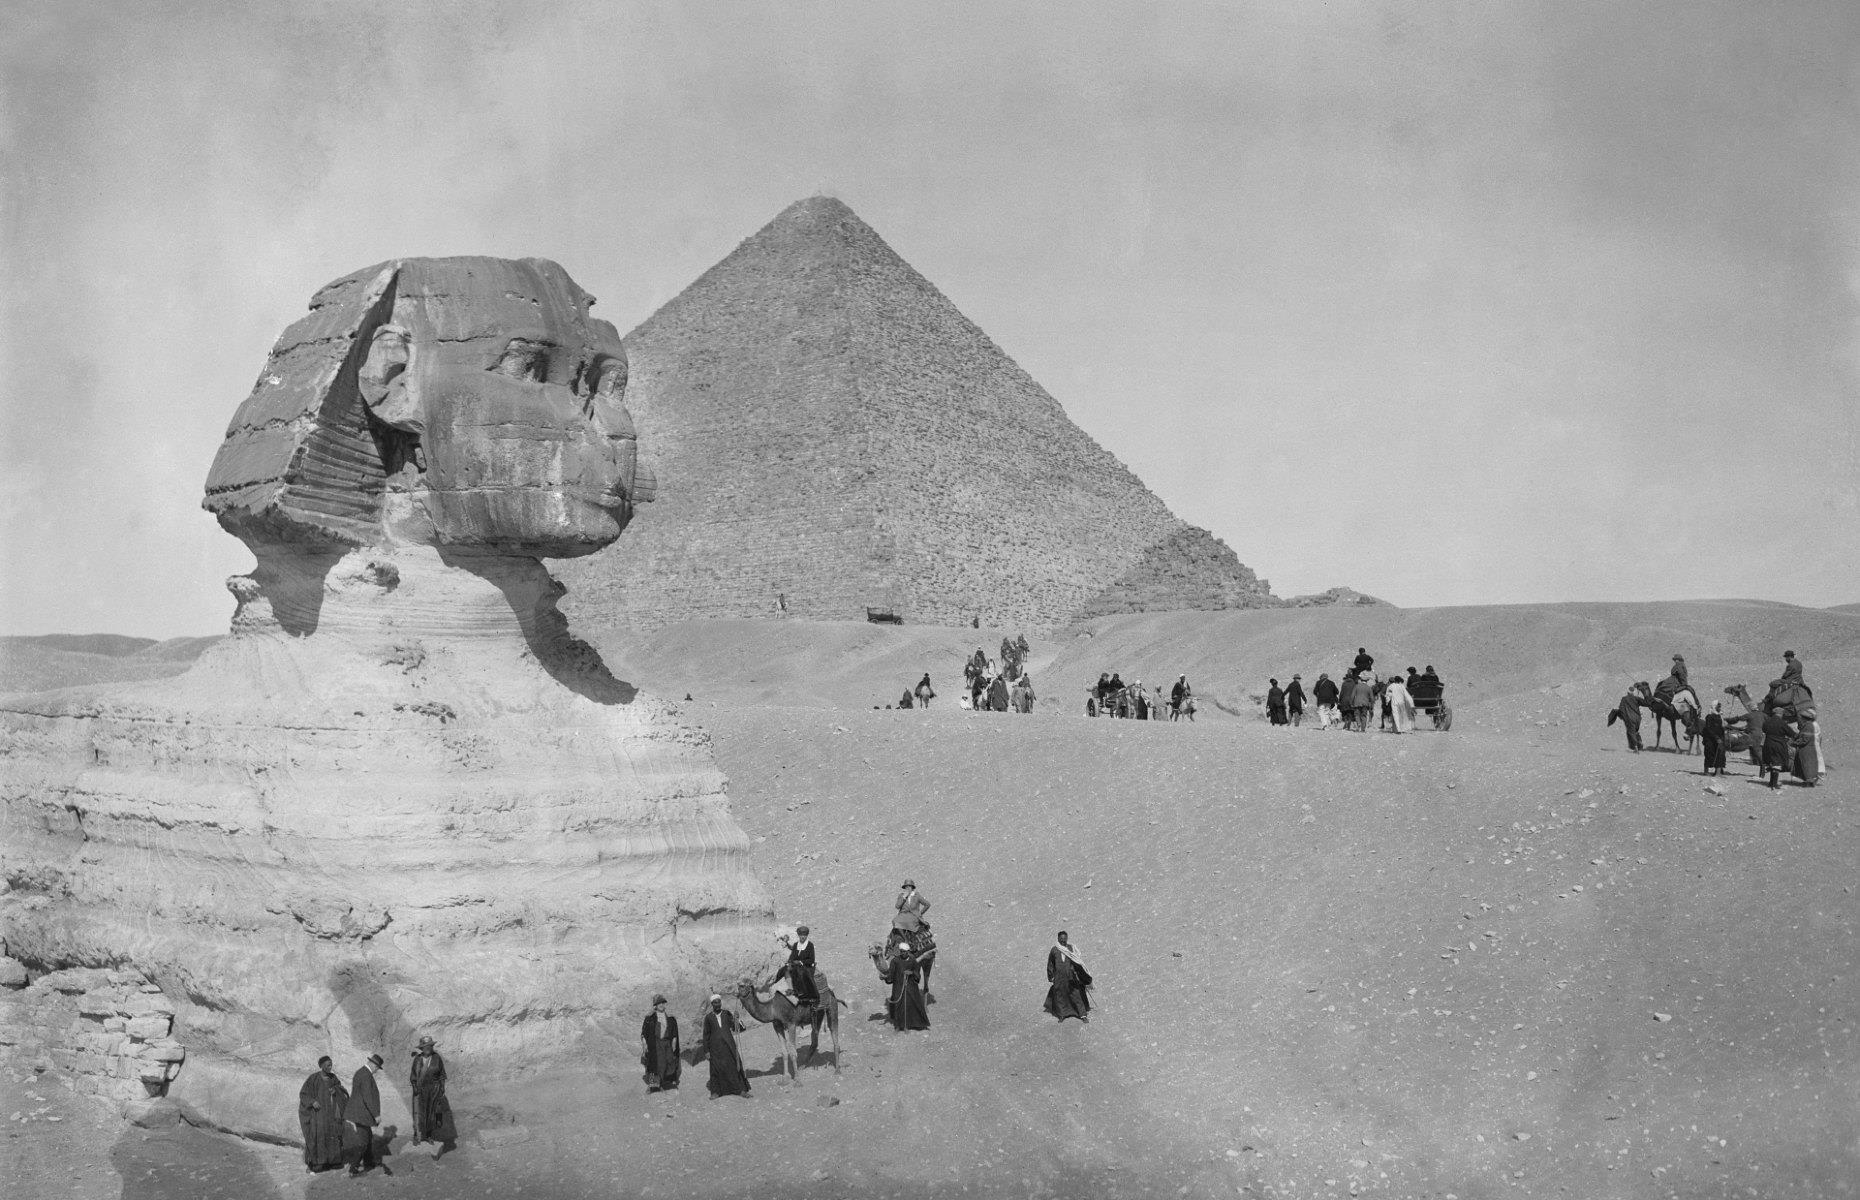 Cruise travel was booming in the 1920s, allowing the world’s wealthy elite to access far-flung destinations for the first time. And Egypt, with its many ancient attractions, quickly became popular. Pictured here, a group of American tourists pose with the Great Sphinx of Giza in 1923. This enormous limestone sculpture, measuring 66-feet (20m) tall and 240-feet (73m) long, was built some 4,500 years ago during the reign of Pharaoh Khafre.